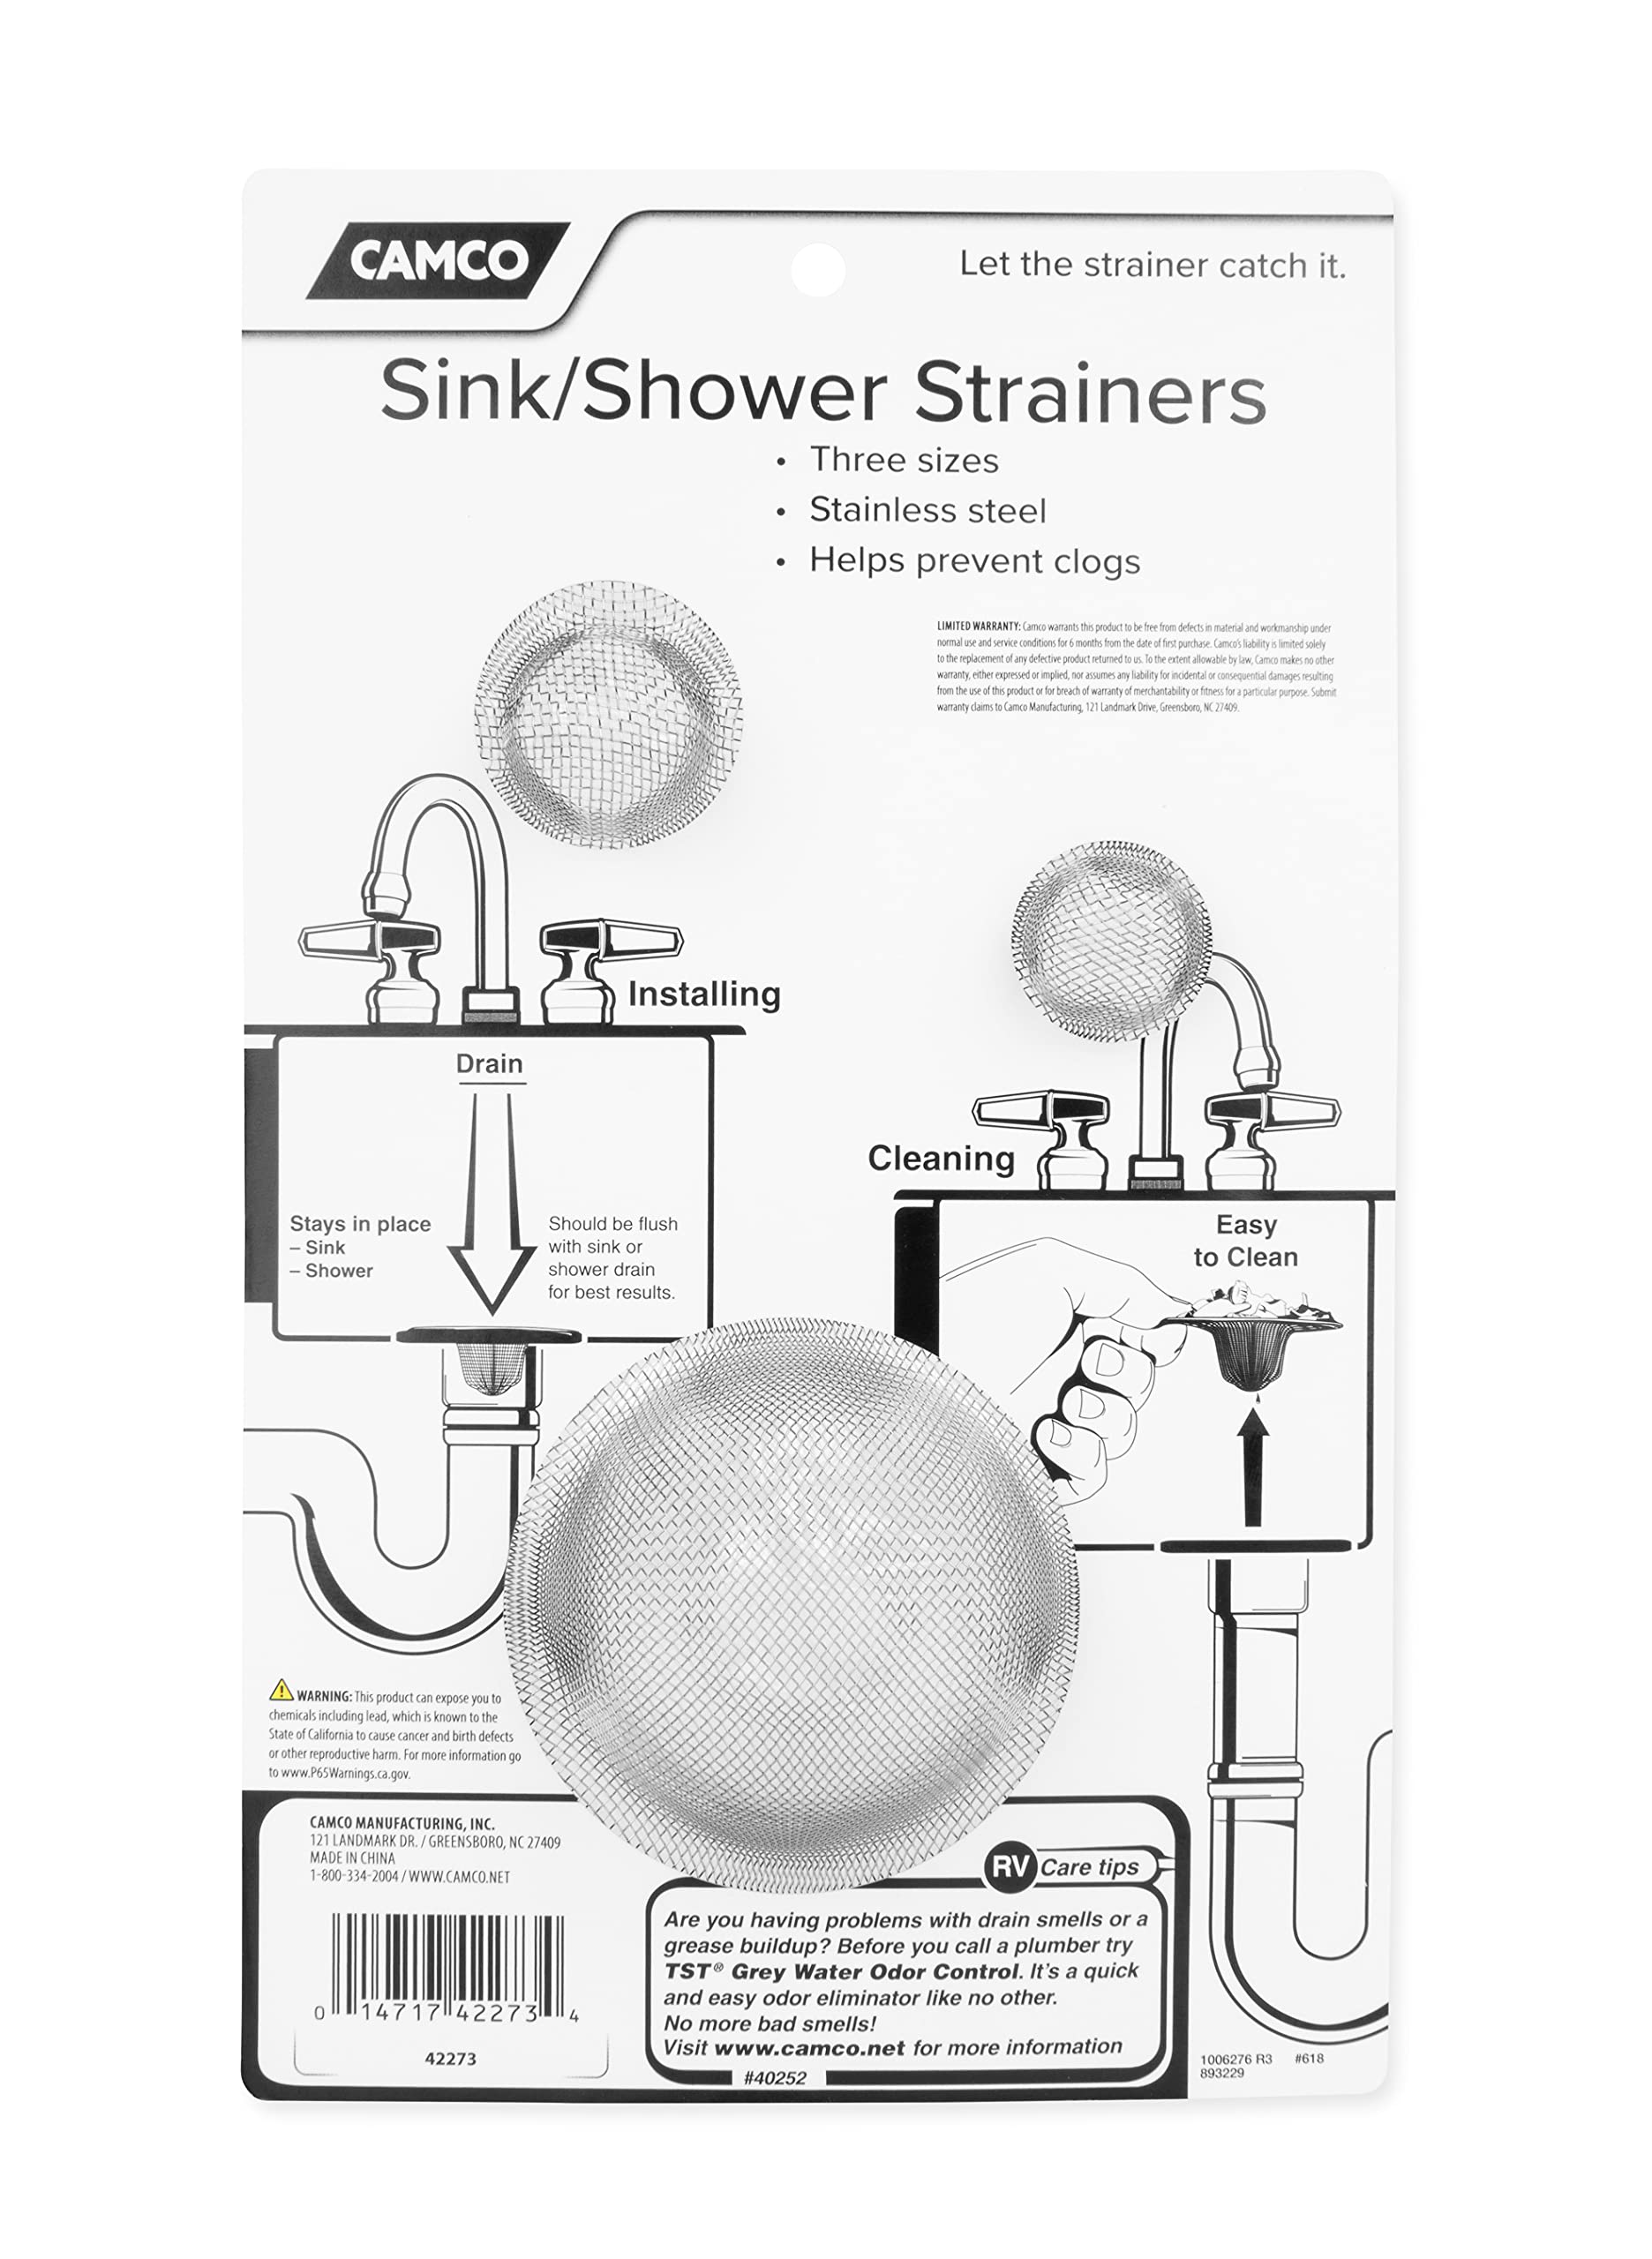 Camco Sink and Shower Drain Strainers | Designed to Keep Food and Hair Out of Plumbing | 3-Pack (42273)